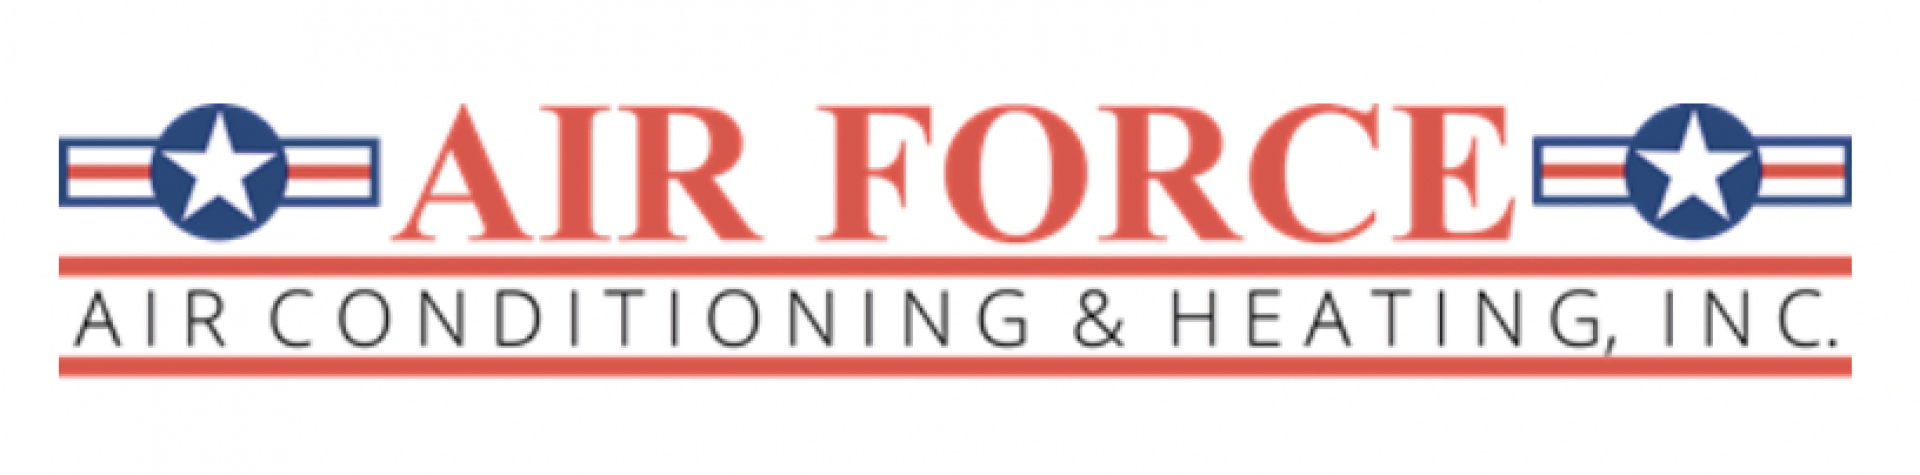 Air Force Air Conditioning and Heating Inc company logo